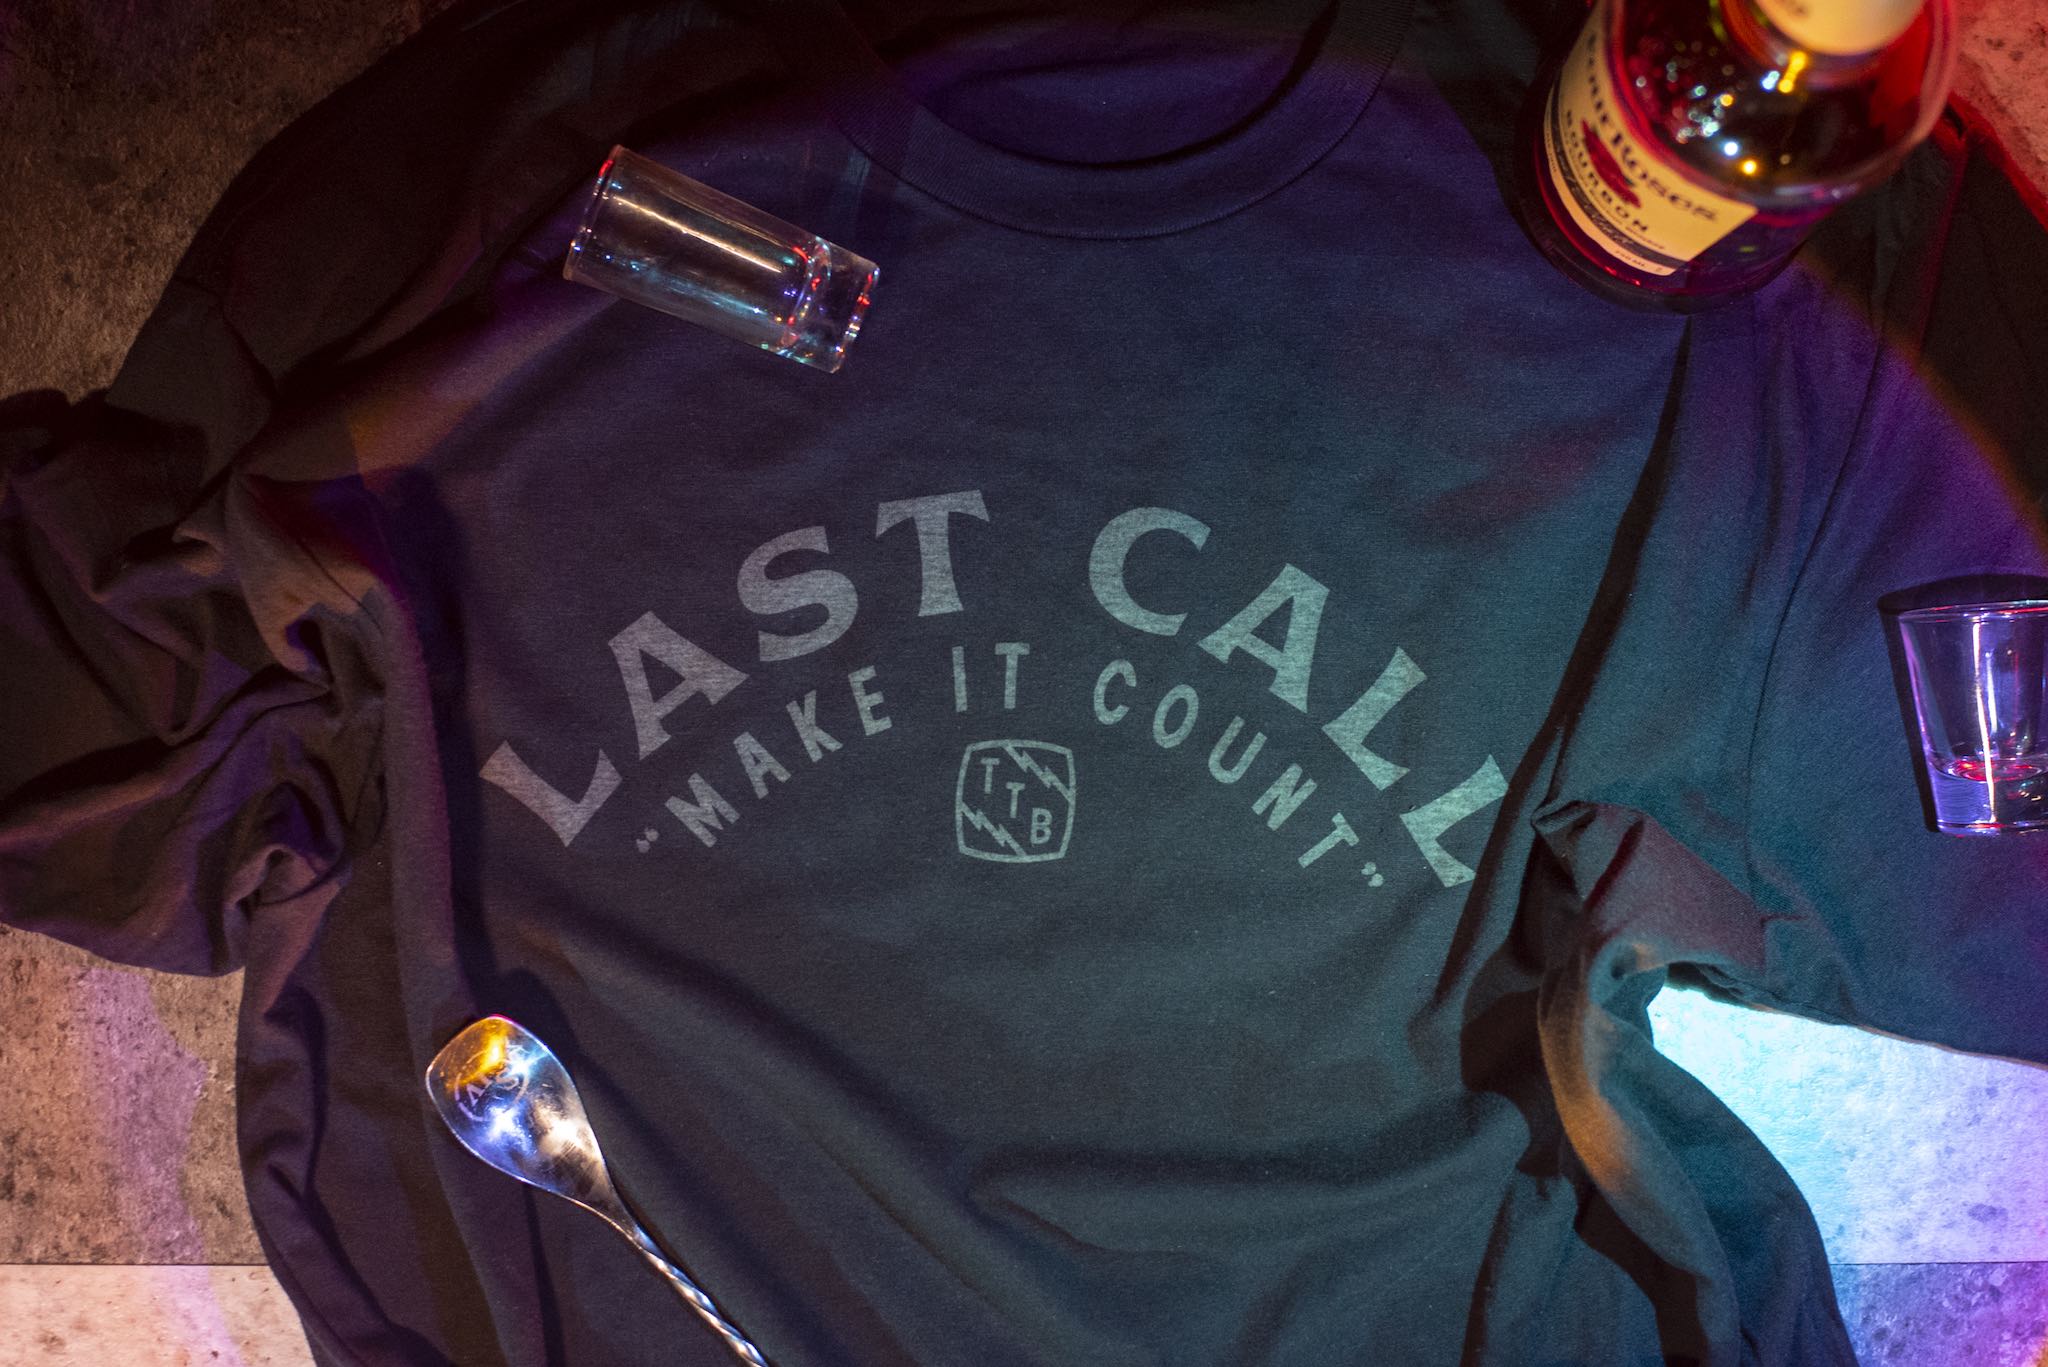 Photograph of a t-shirt laid on a countertop, emblazoned with with "Last Call, Make it Count". A bottle of bourbon, some shot glasses, and a bar spoon are scattered about.